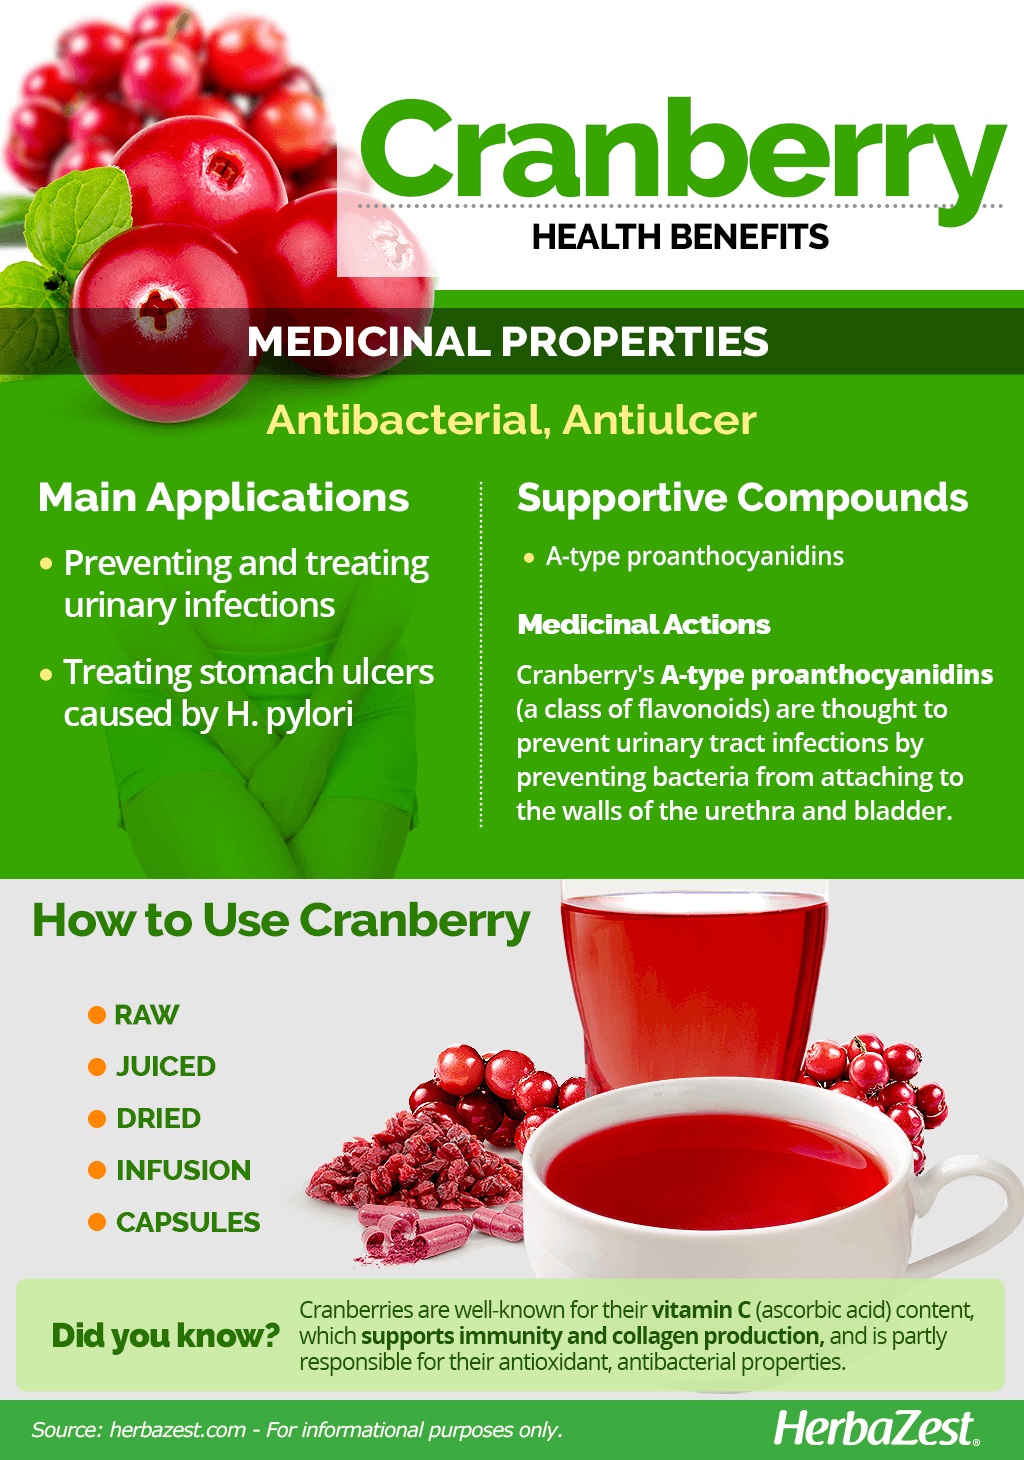 All About Cranberry